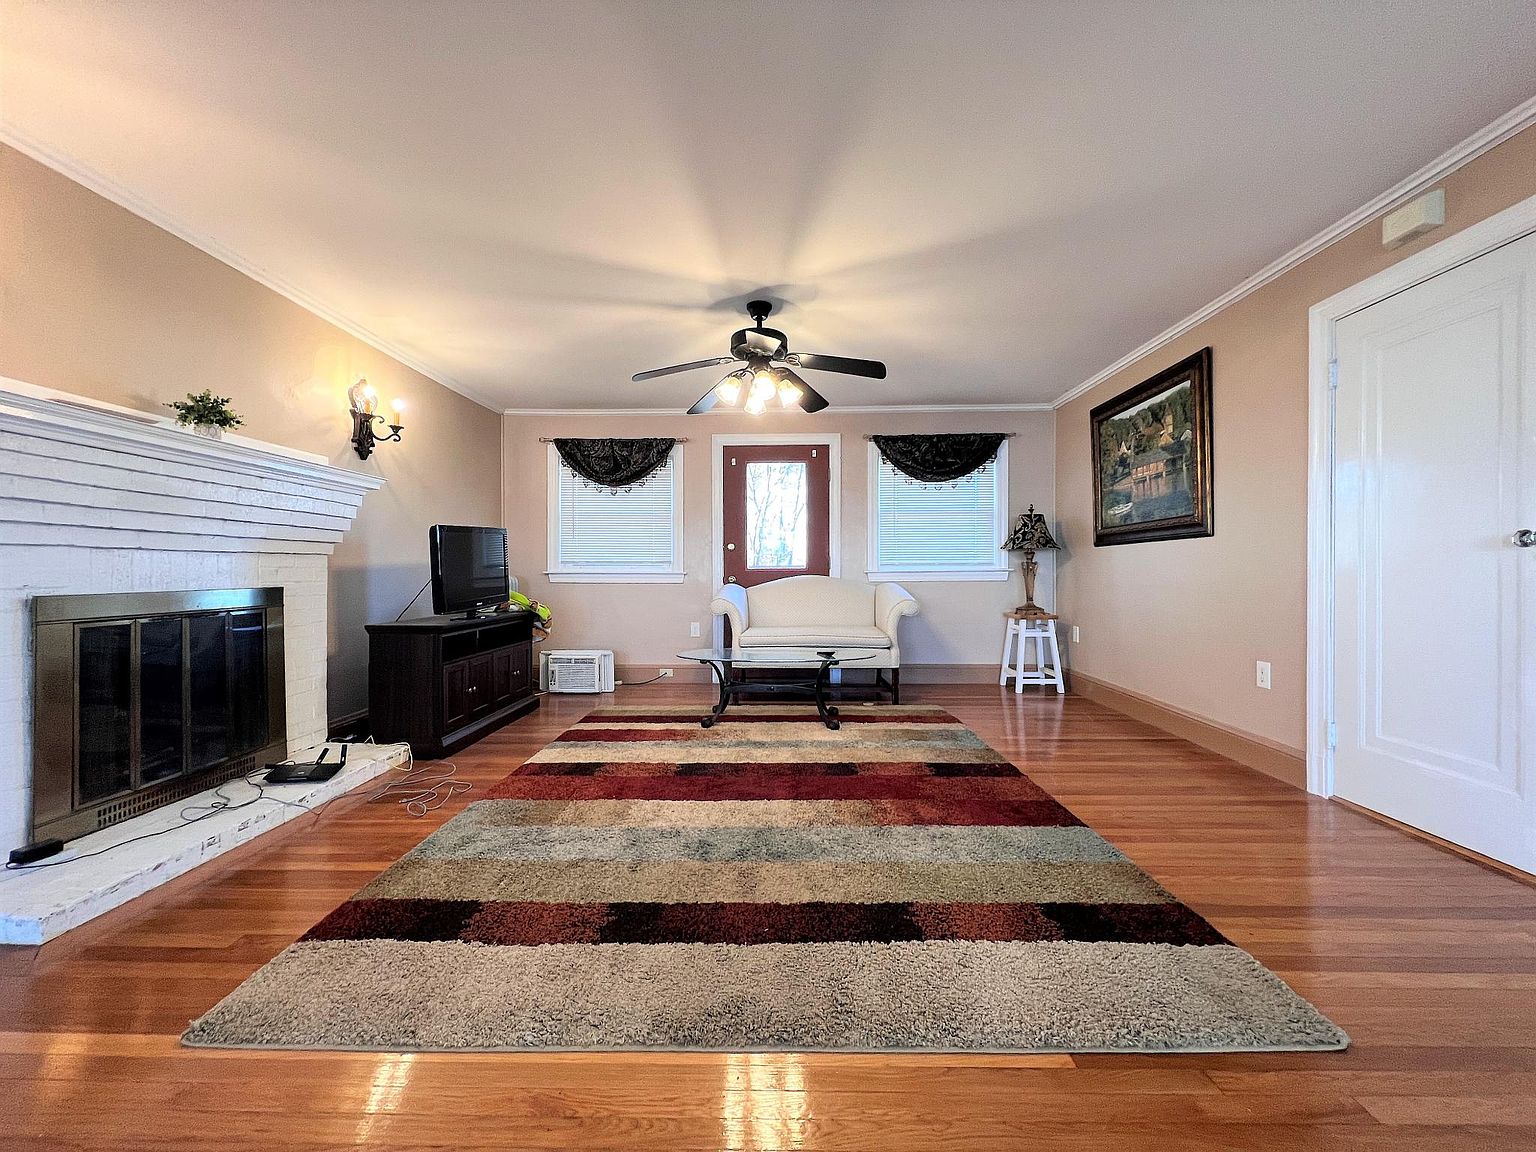 87 Conant Rd #2, Quincy, MA 02171 | Zillow